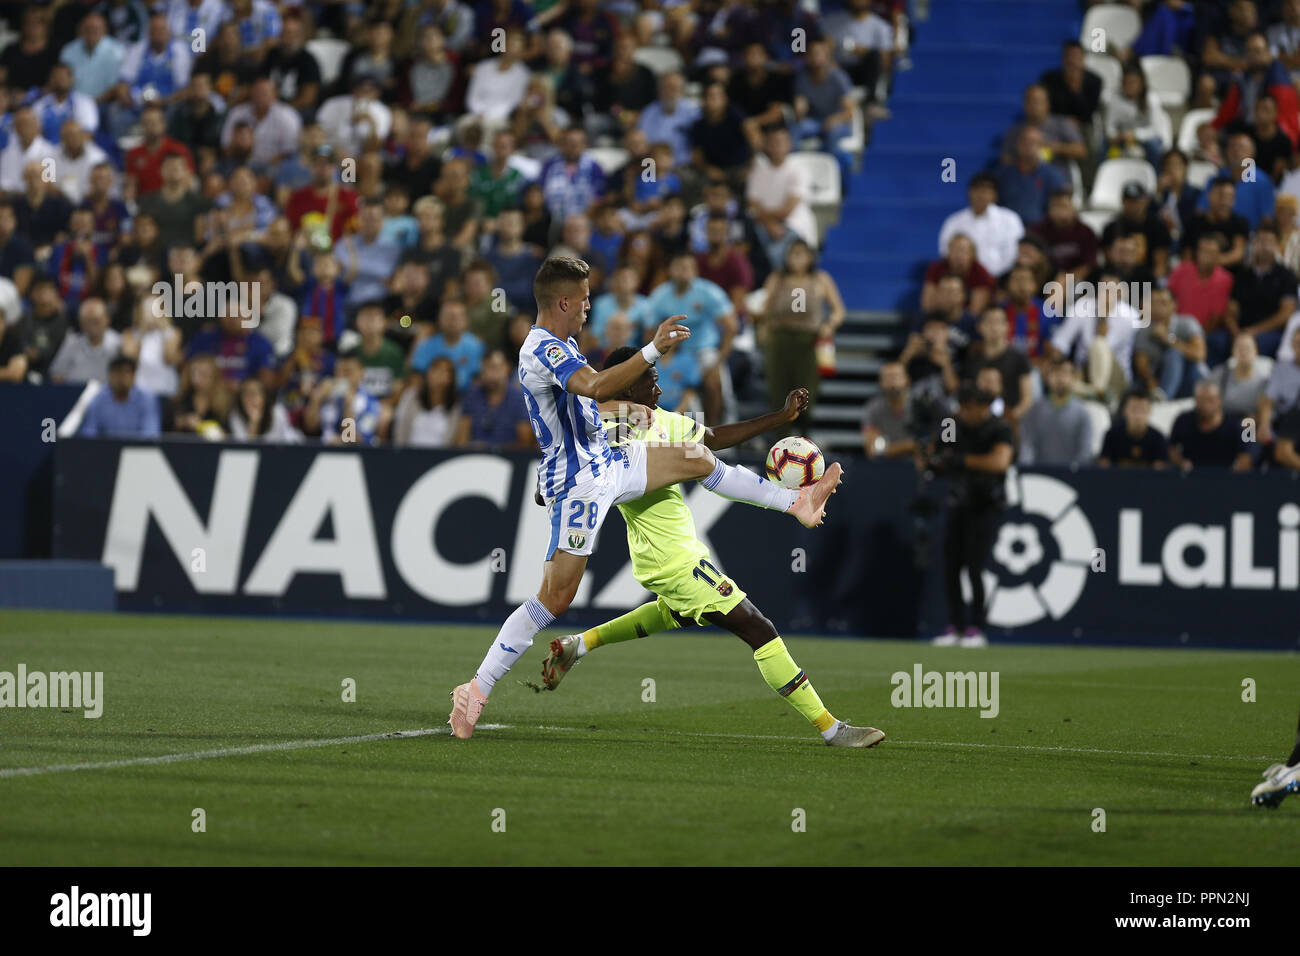 Leganes, Madrid, Spain. 26th Sep, 2018. Ousmane Dembele (FC Barcelona) seen in action during the game.La Liga match between CD Leganes and FC Barcelona at Butarque Stadium. Credit: Manu Reino/SOPA Images/ZUMA Wire/Alamy Live News Stock Photo